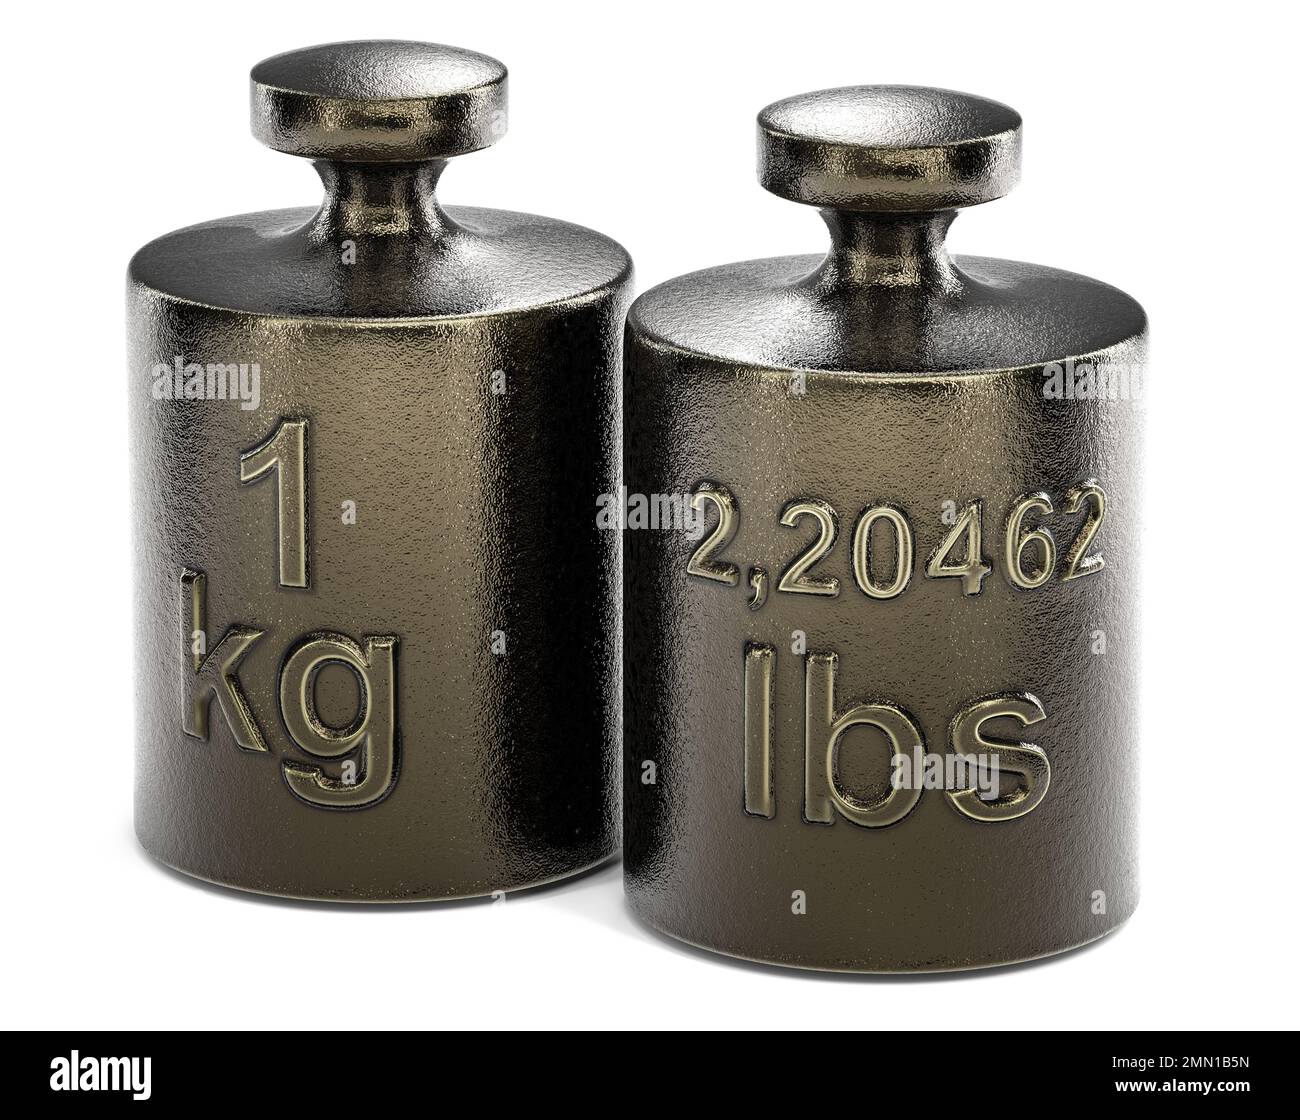 Convert one kilogram to pounds. Weight with 1 kg and another one with 2,2046 lbs over white background, 3d illustration. Stock Photo